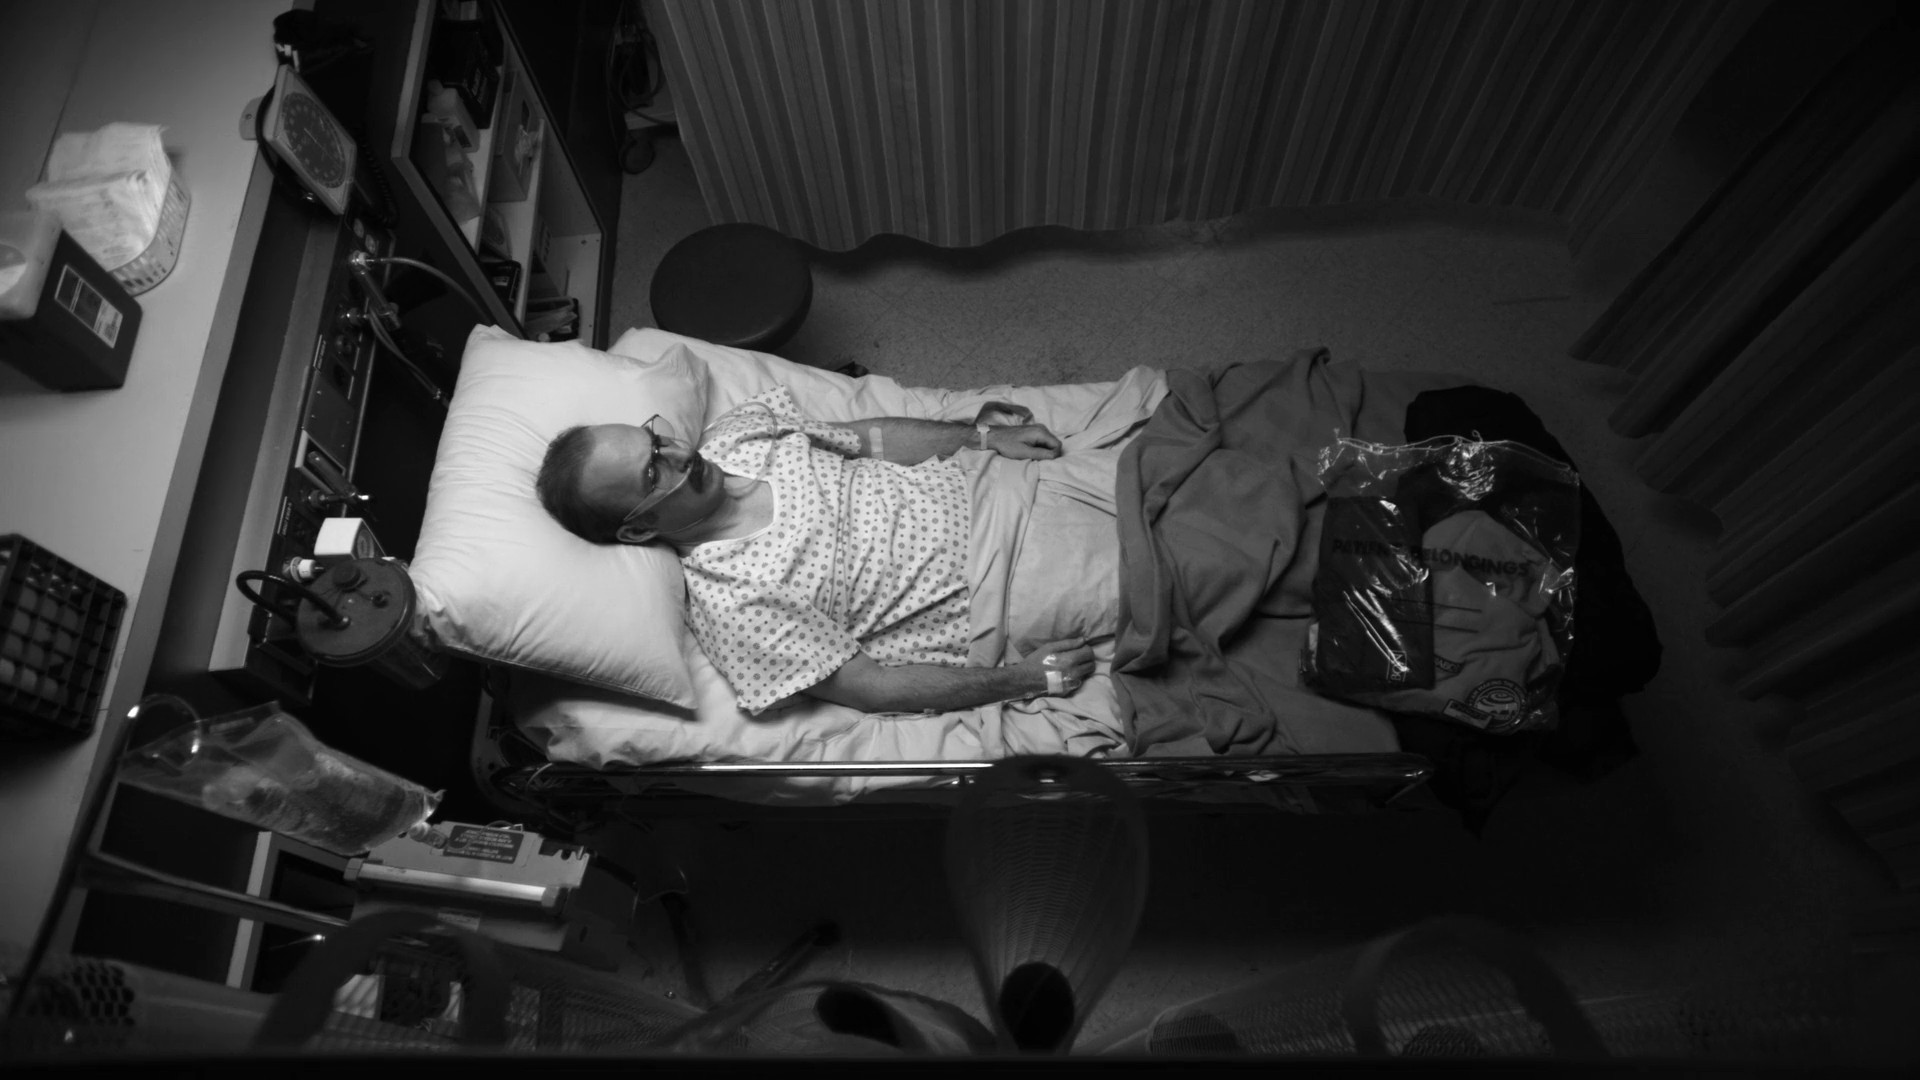 Saul lies in a hospital bed